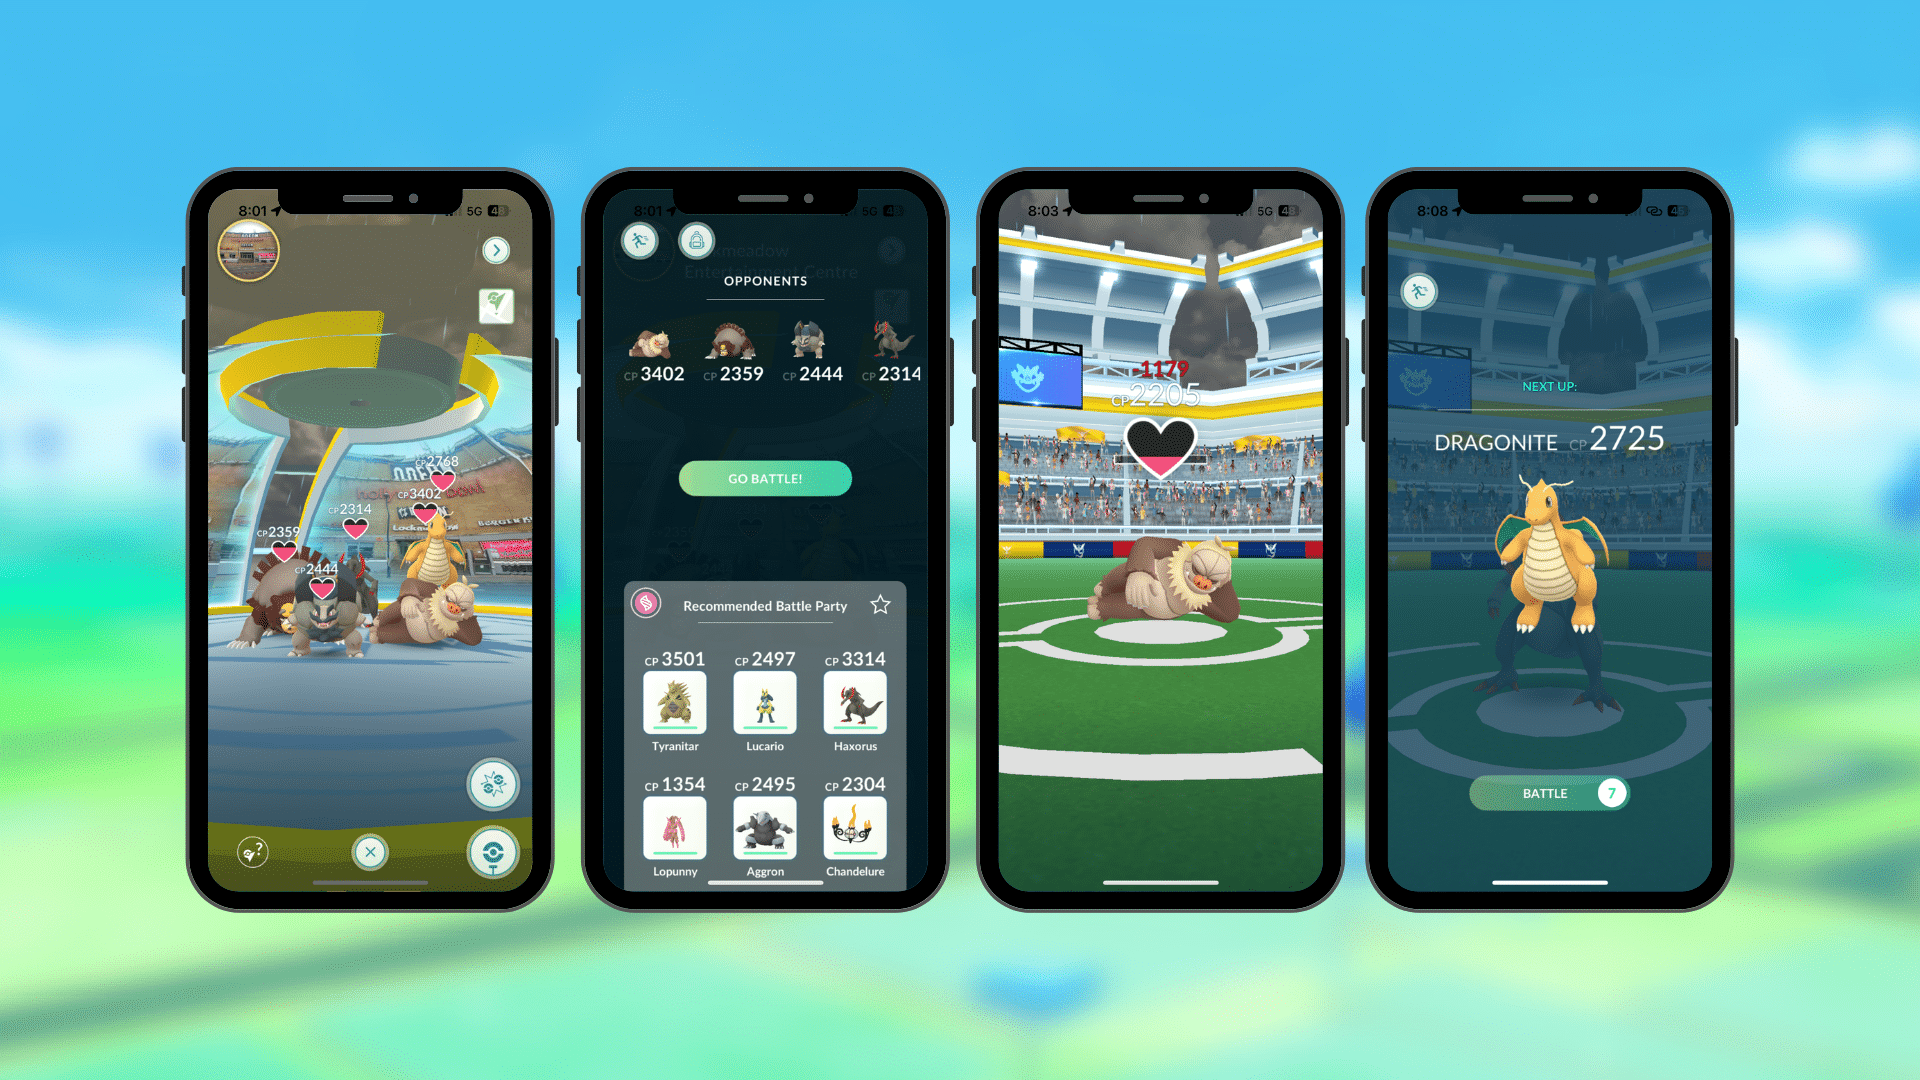 In-game screenshots from left to right 1. Showing Pokémon defending the gym 2. Showing the team selection page 3. Showing Slaking losing motivation 4. Showing next Pokémon auto lined up to battle